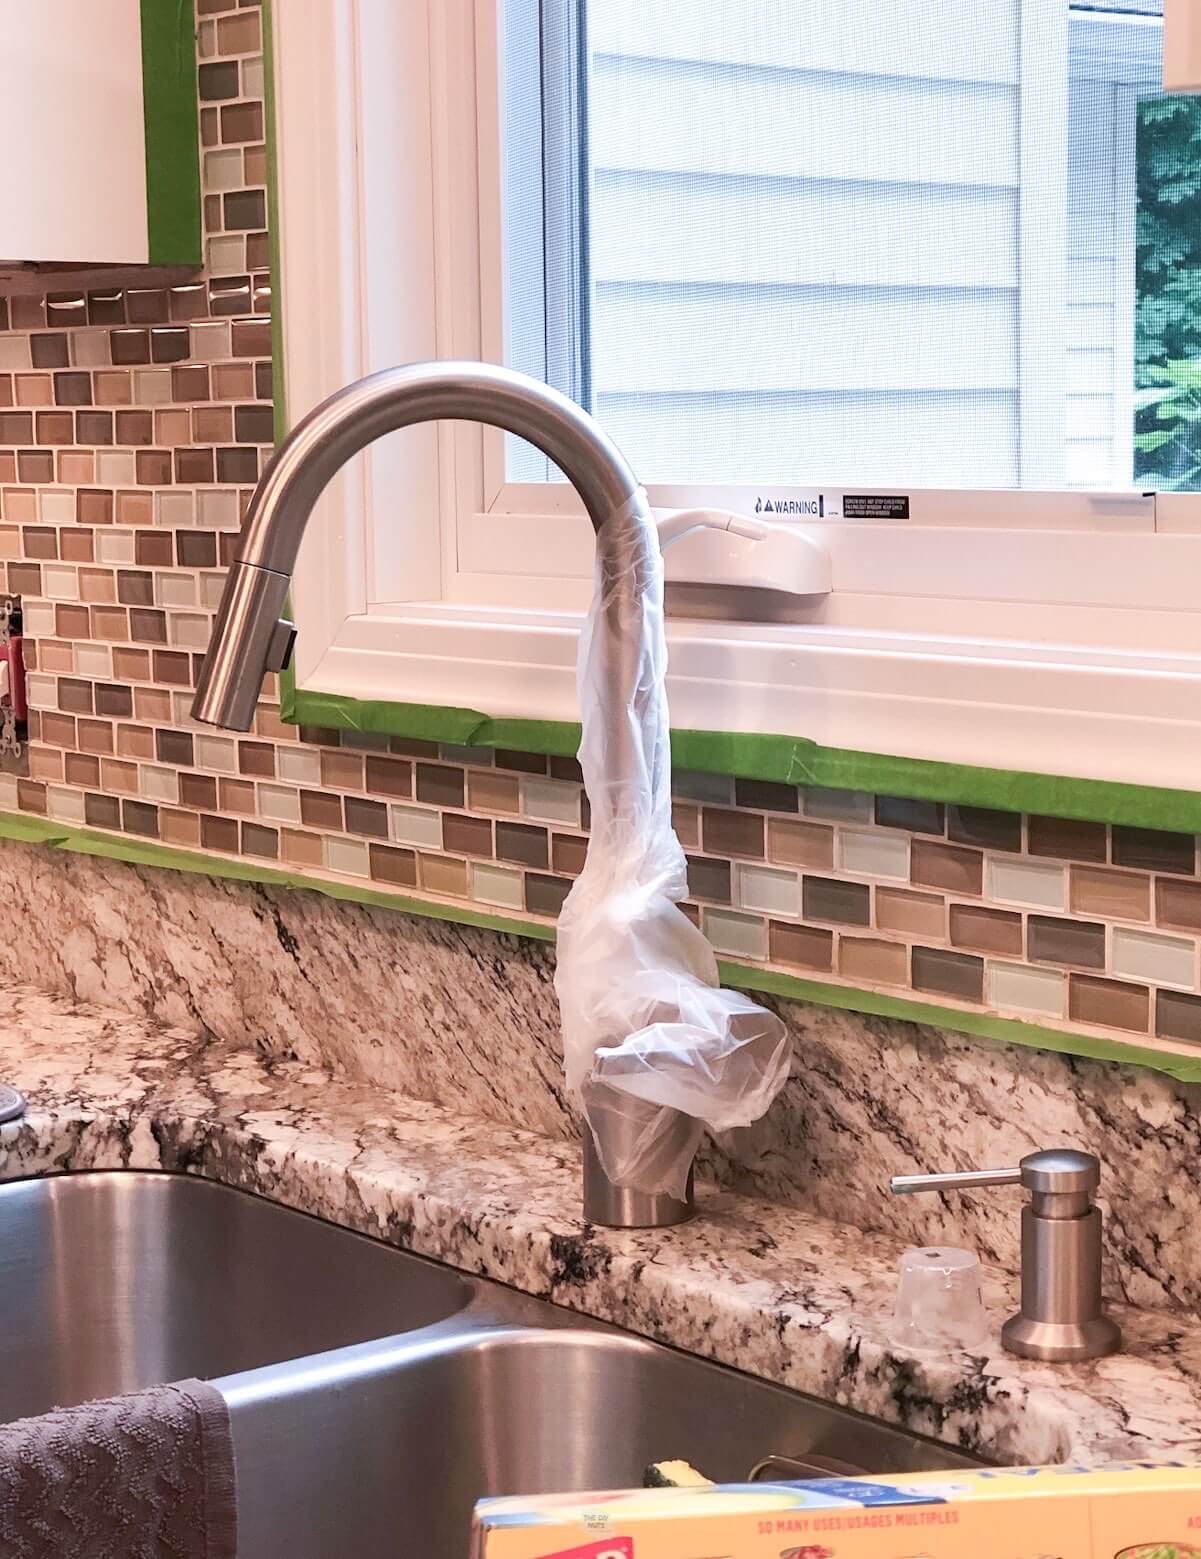 faucet wrapped in Cling Wrap to help with paint prep of tile.